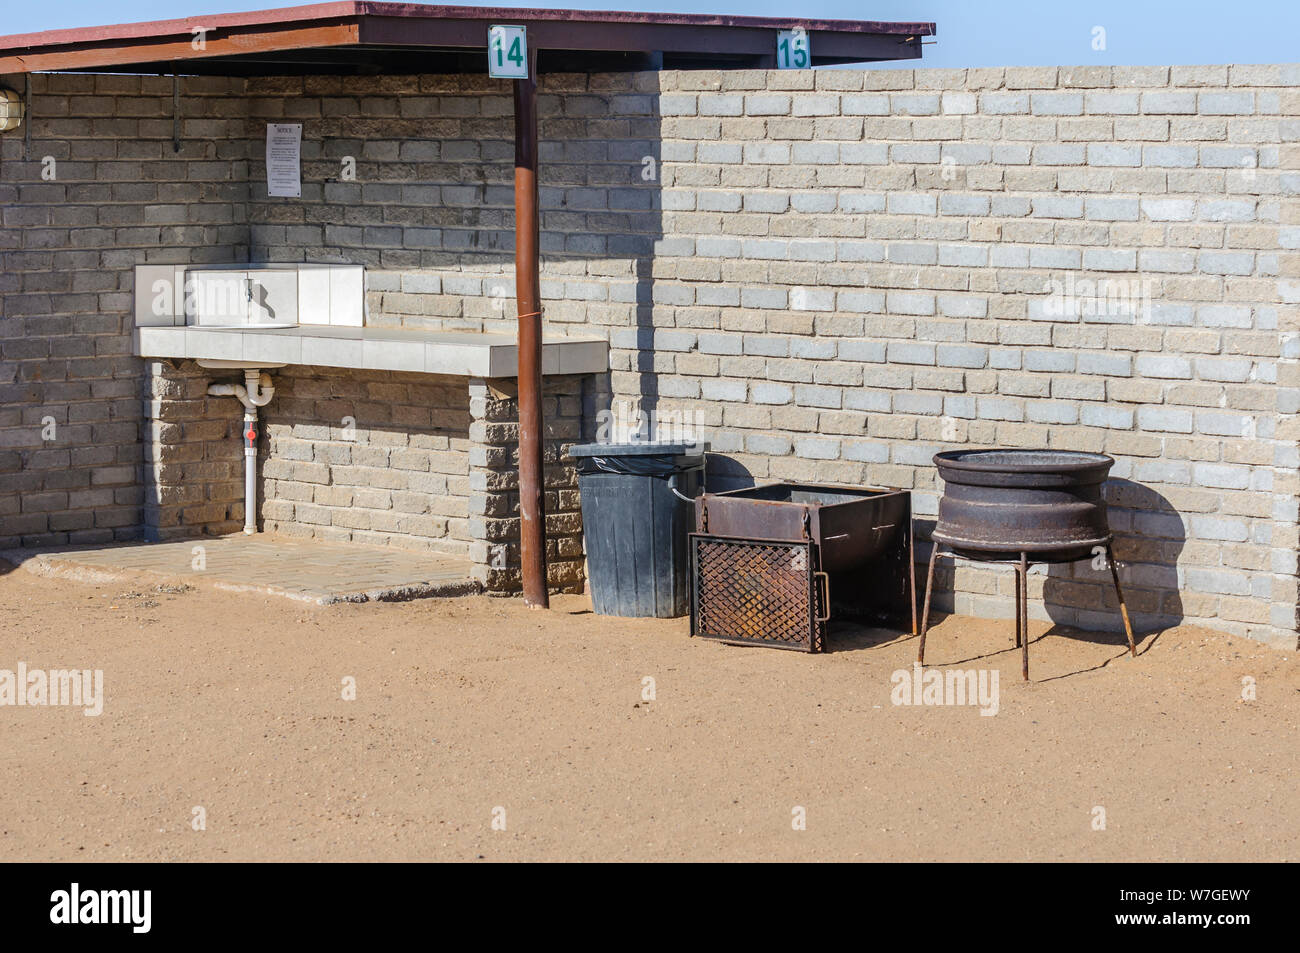 Facilities, including a sink, bin, bench and barbeque at a campsite in Namibia Stock Photo